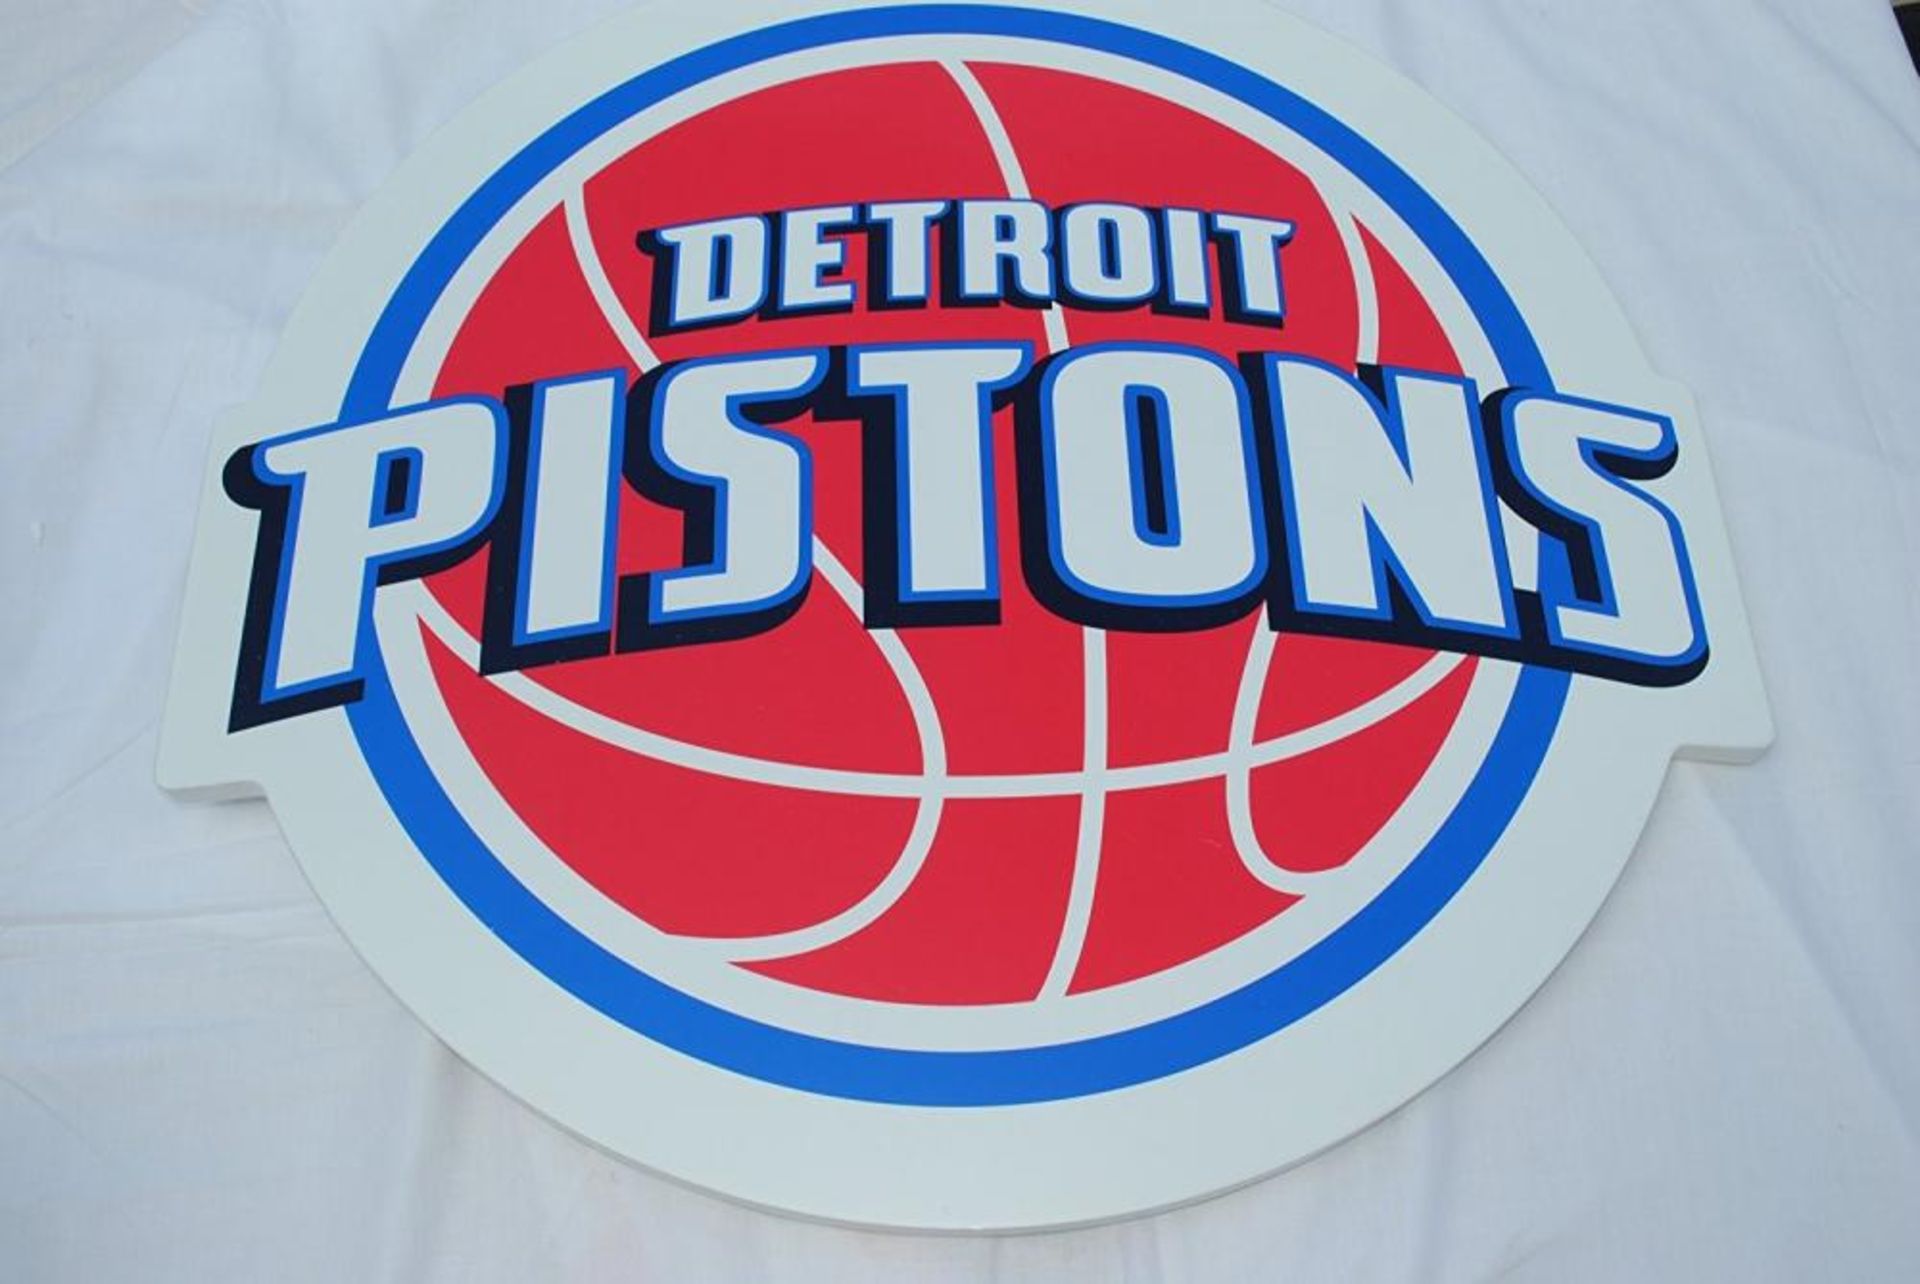 4 x 24" NBA Basketball Detroit Pistons Plaques - New/Boxed - CL185 - Ref: DRT0751 - Location: Stoke-